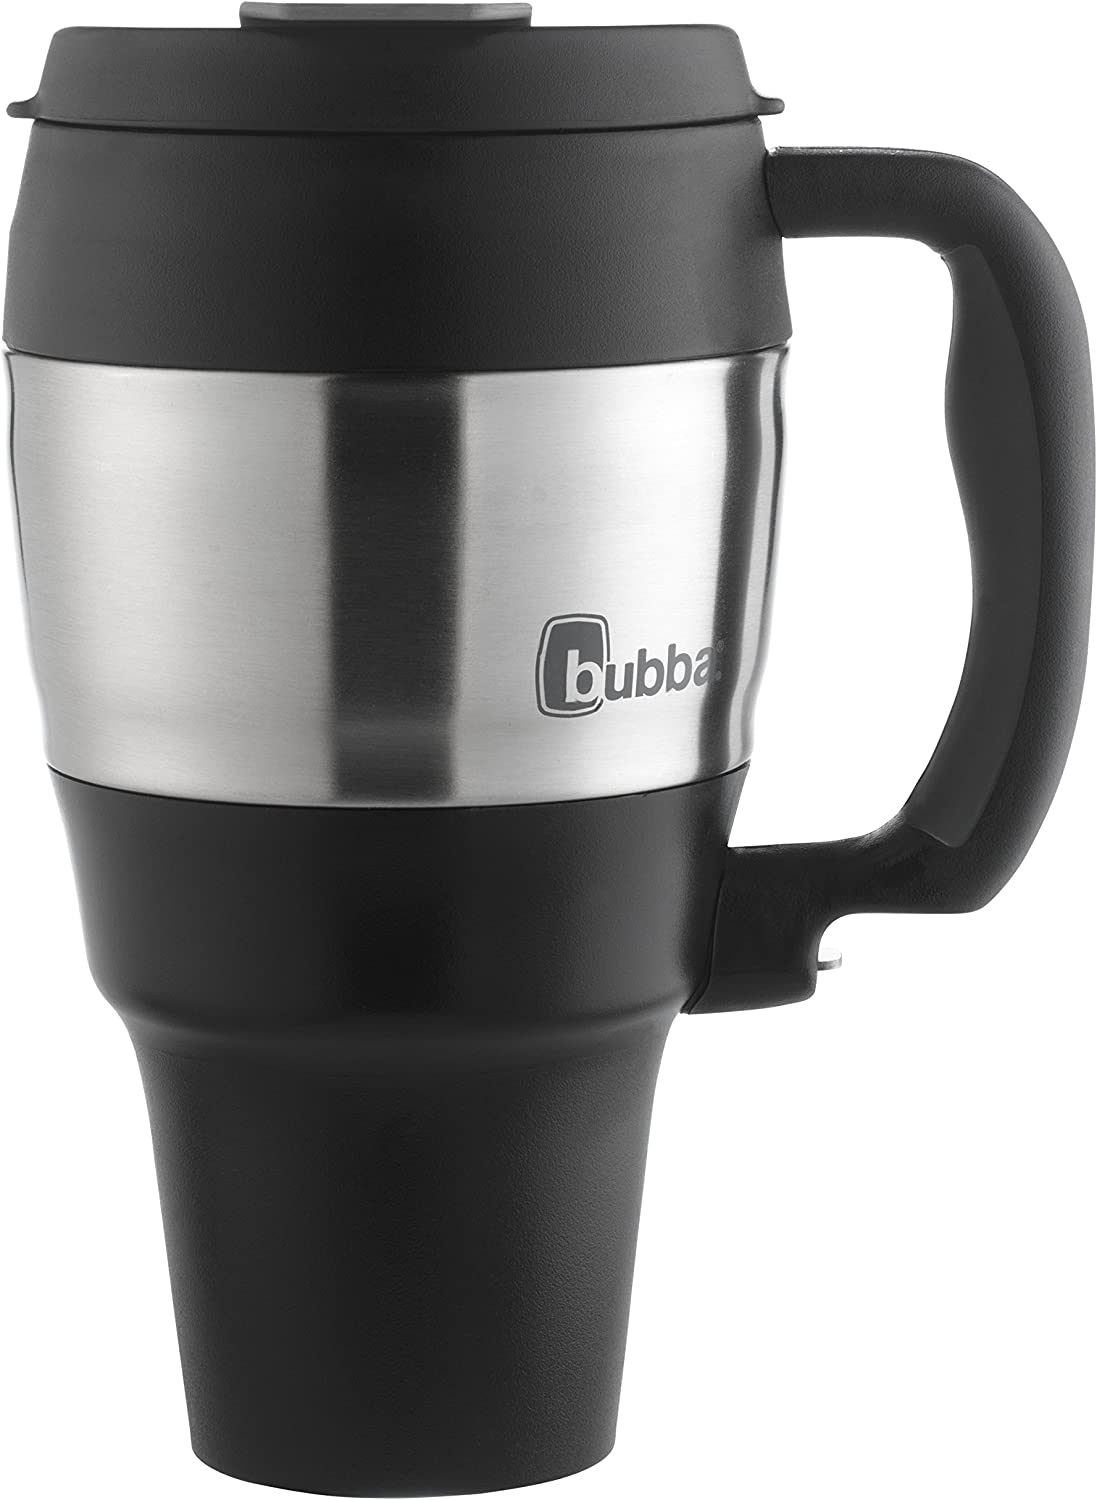 Bubba Brands 1955218 BUBBA 34OZ TRAVEL BLACK, One Size (Pack of 1) Import To Shop ×Product customization General Description